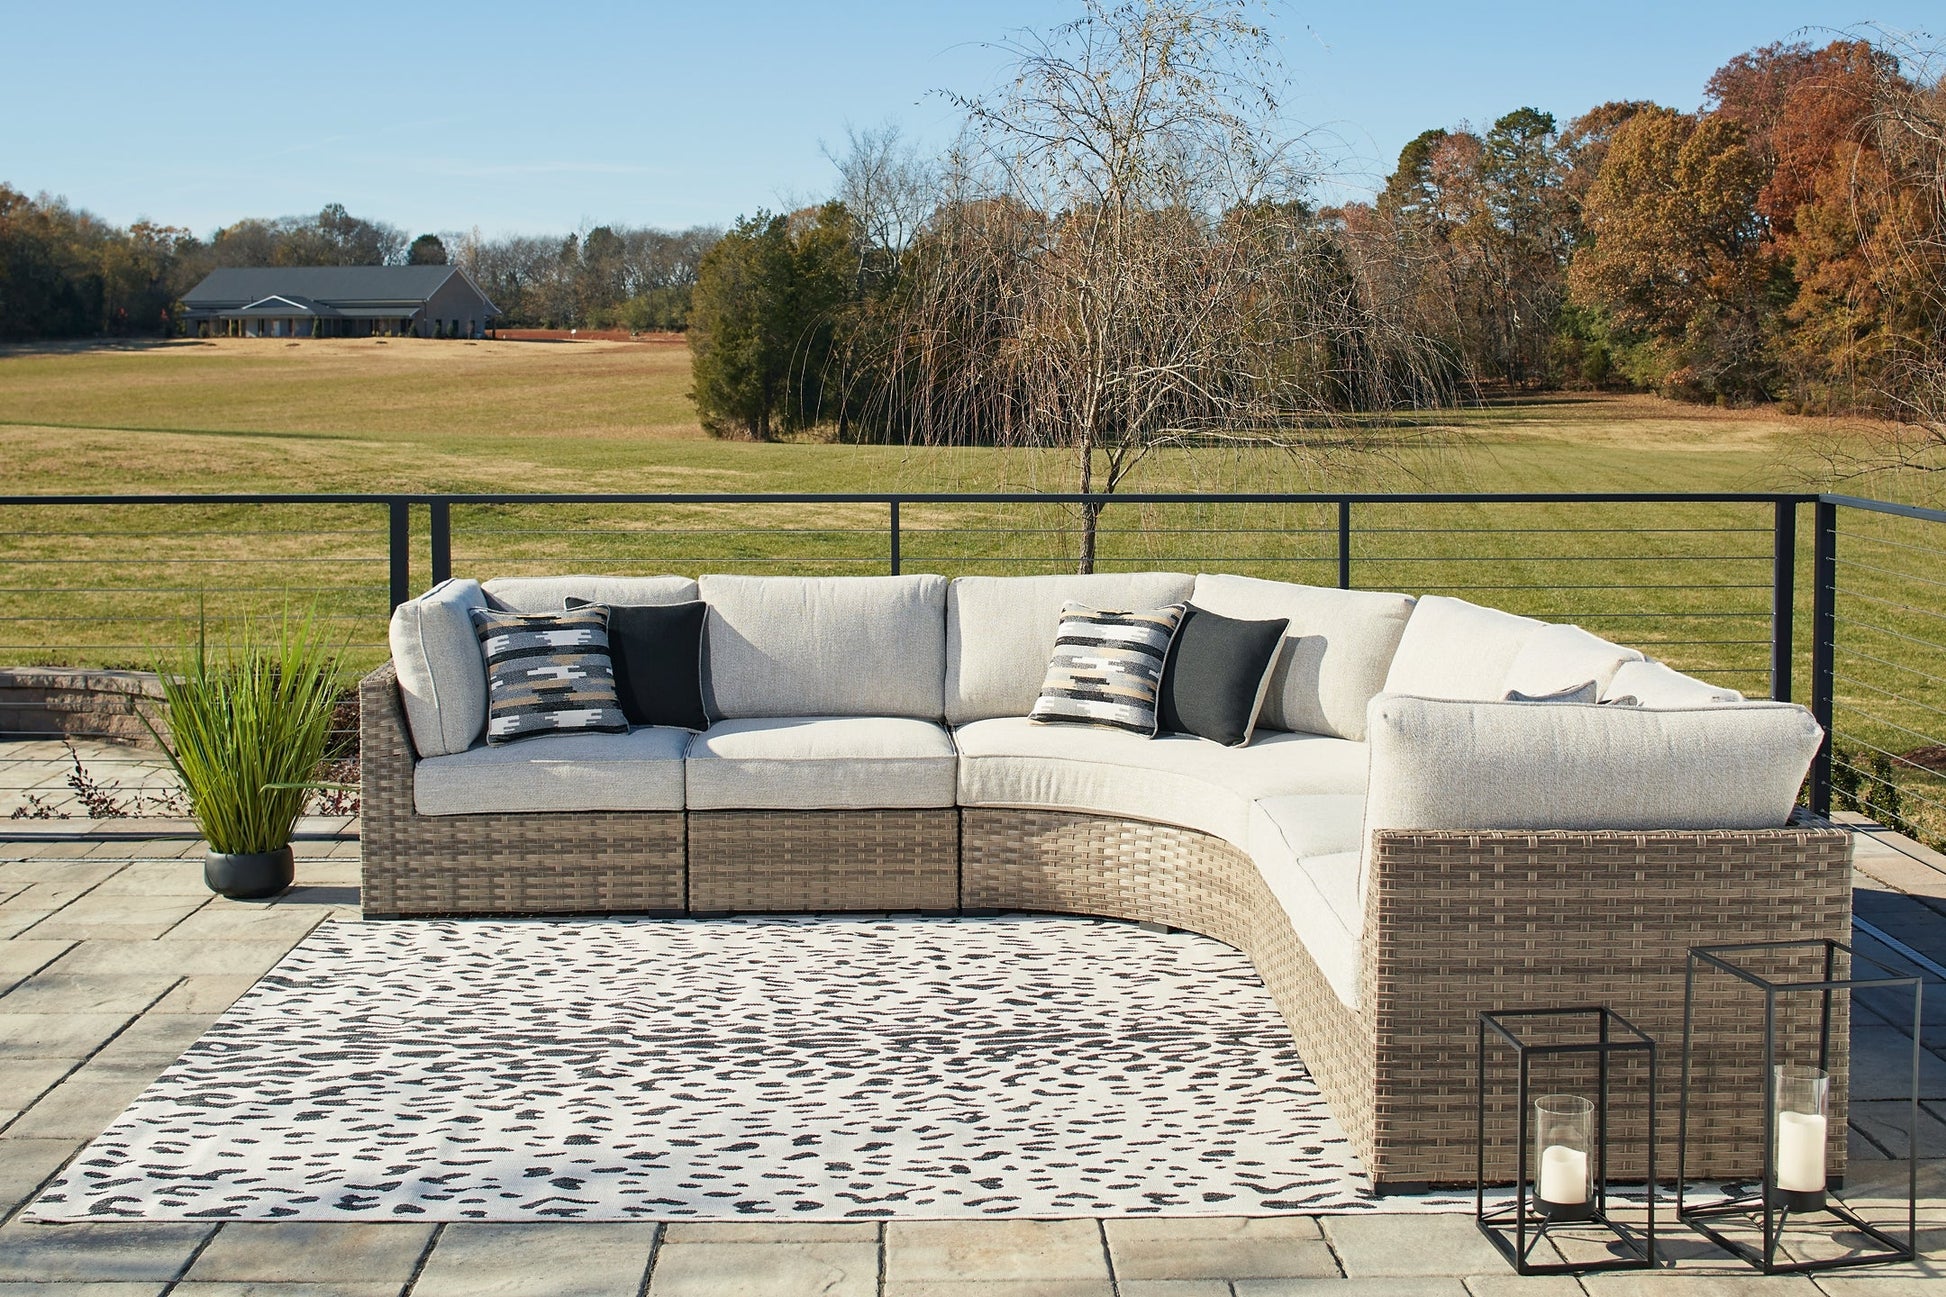 Calworth 5-Piece Outdoor Sectional Smyrna Furniture Outlet